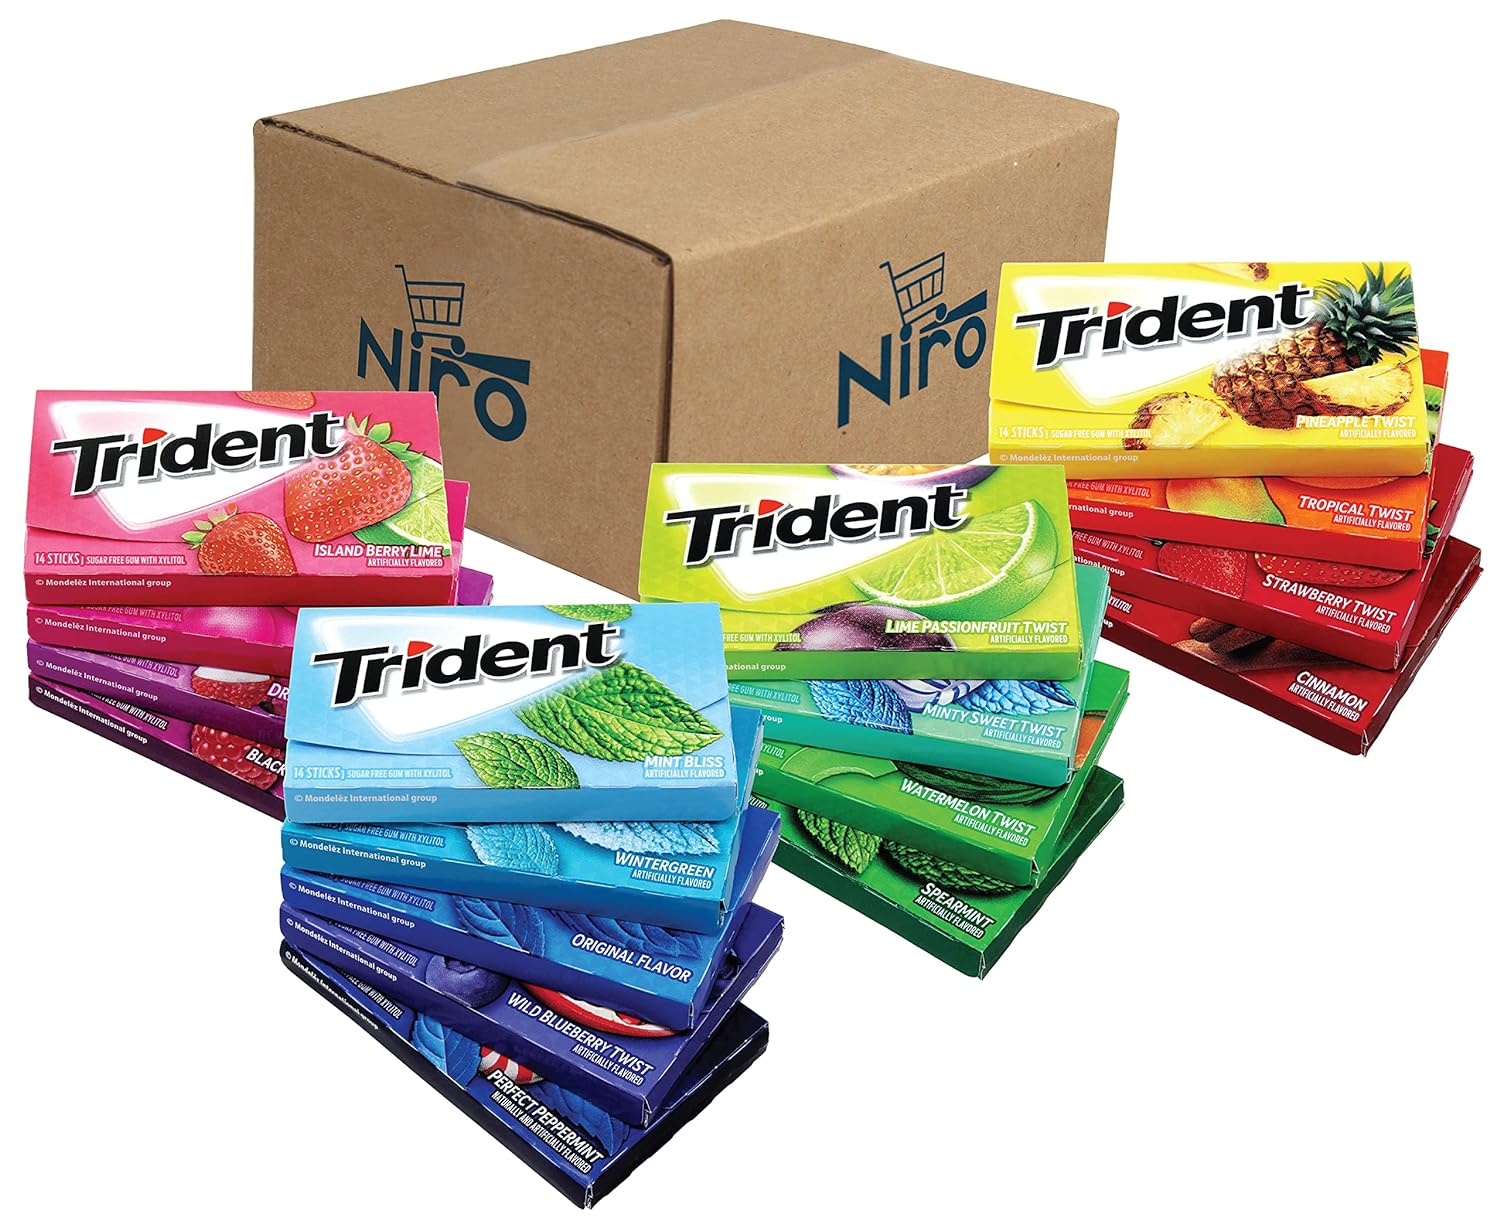 Niro Assortment | Trident Chewing Gum Sampler Gum Variety Pack | Sugar-Free | Assorted Flavor (10 Pack) Receive 10 out of the 18 flavors : Grocery & Gourmet Food